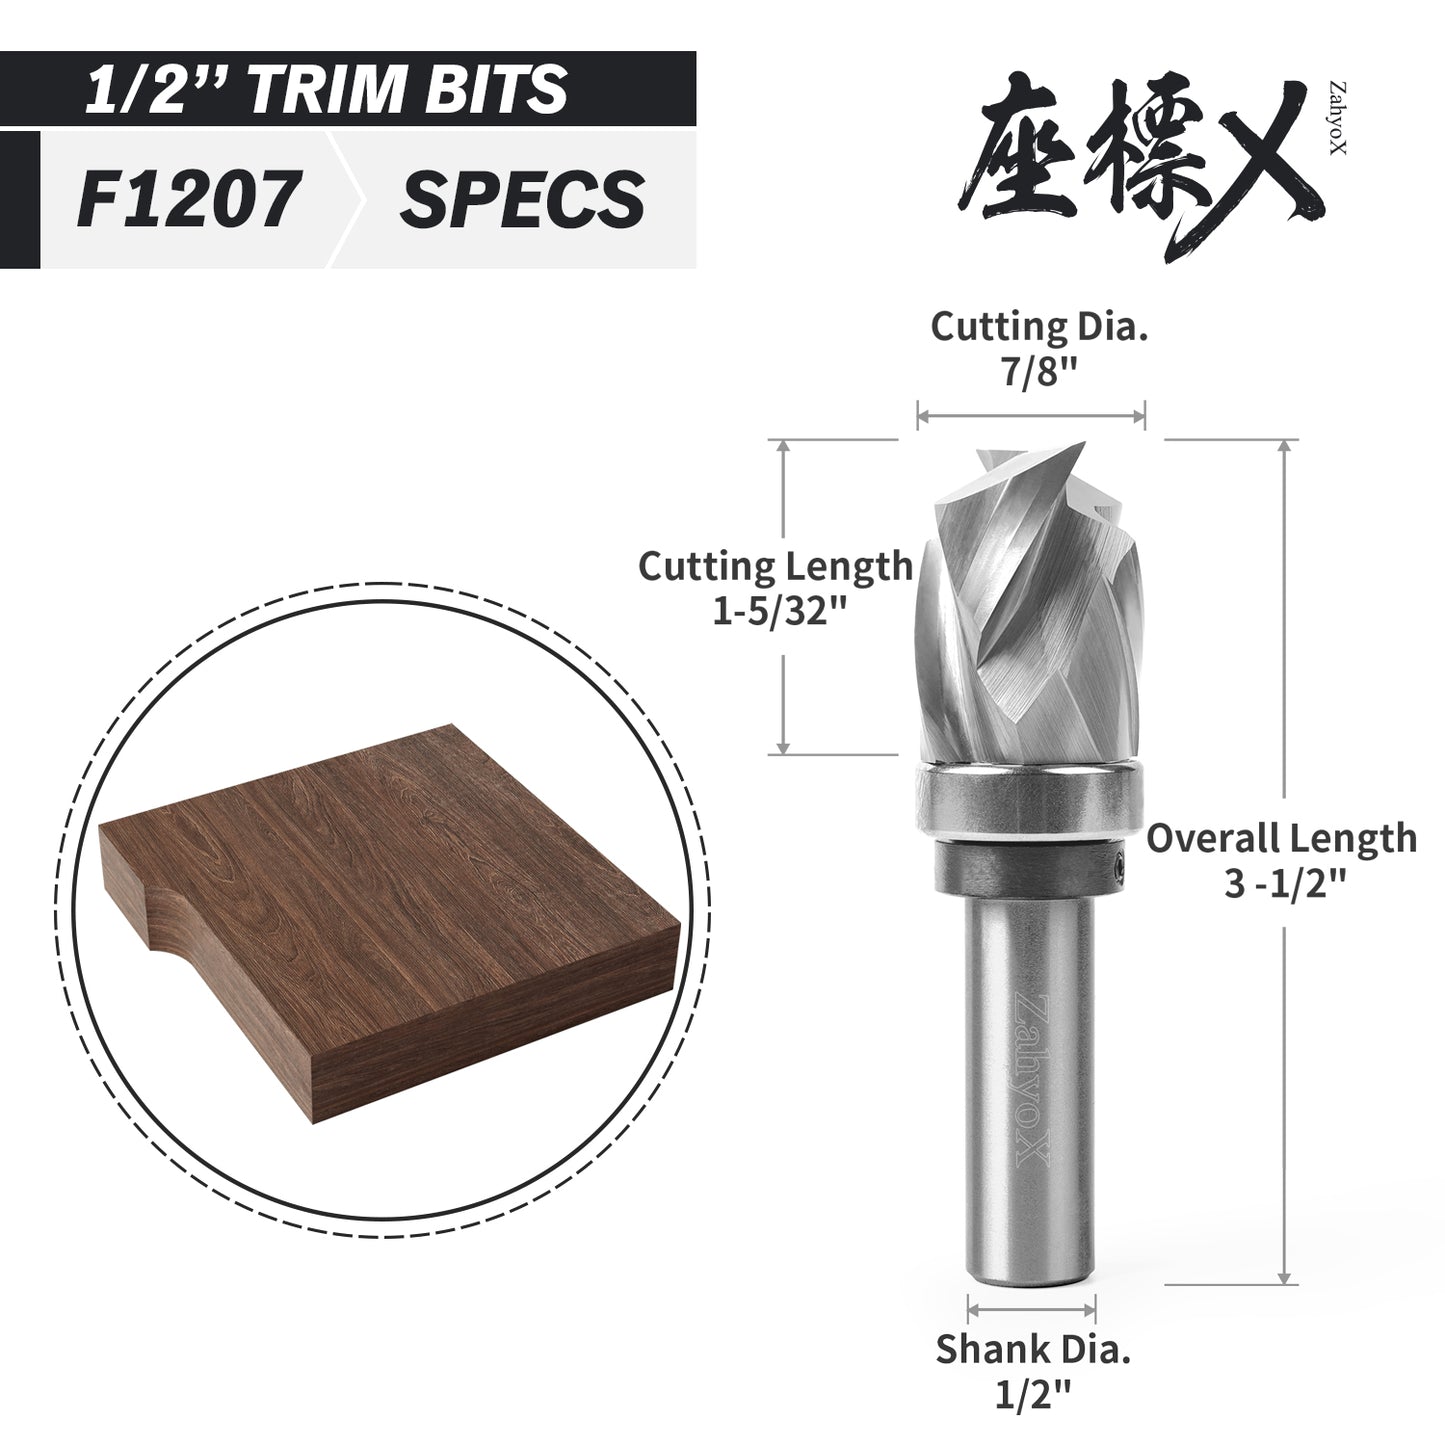 F1207 Compression Pattern/Template Bit with Top Bearing - 1/2 SD - 7/8 CD - 1-5/32 CL - 3-1/2 OL